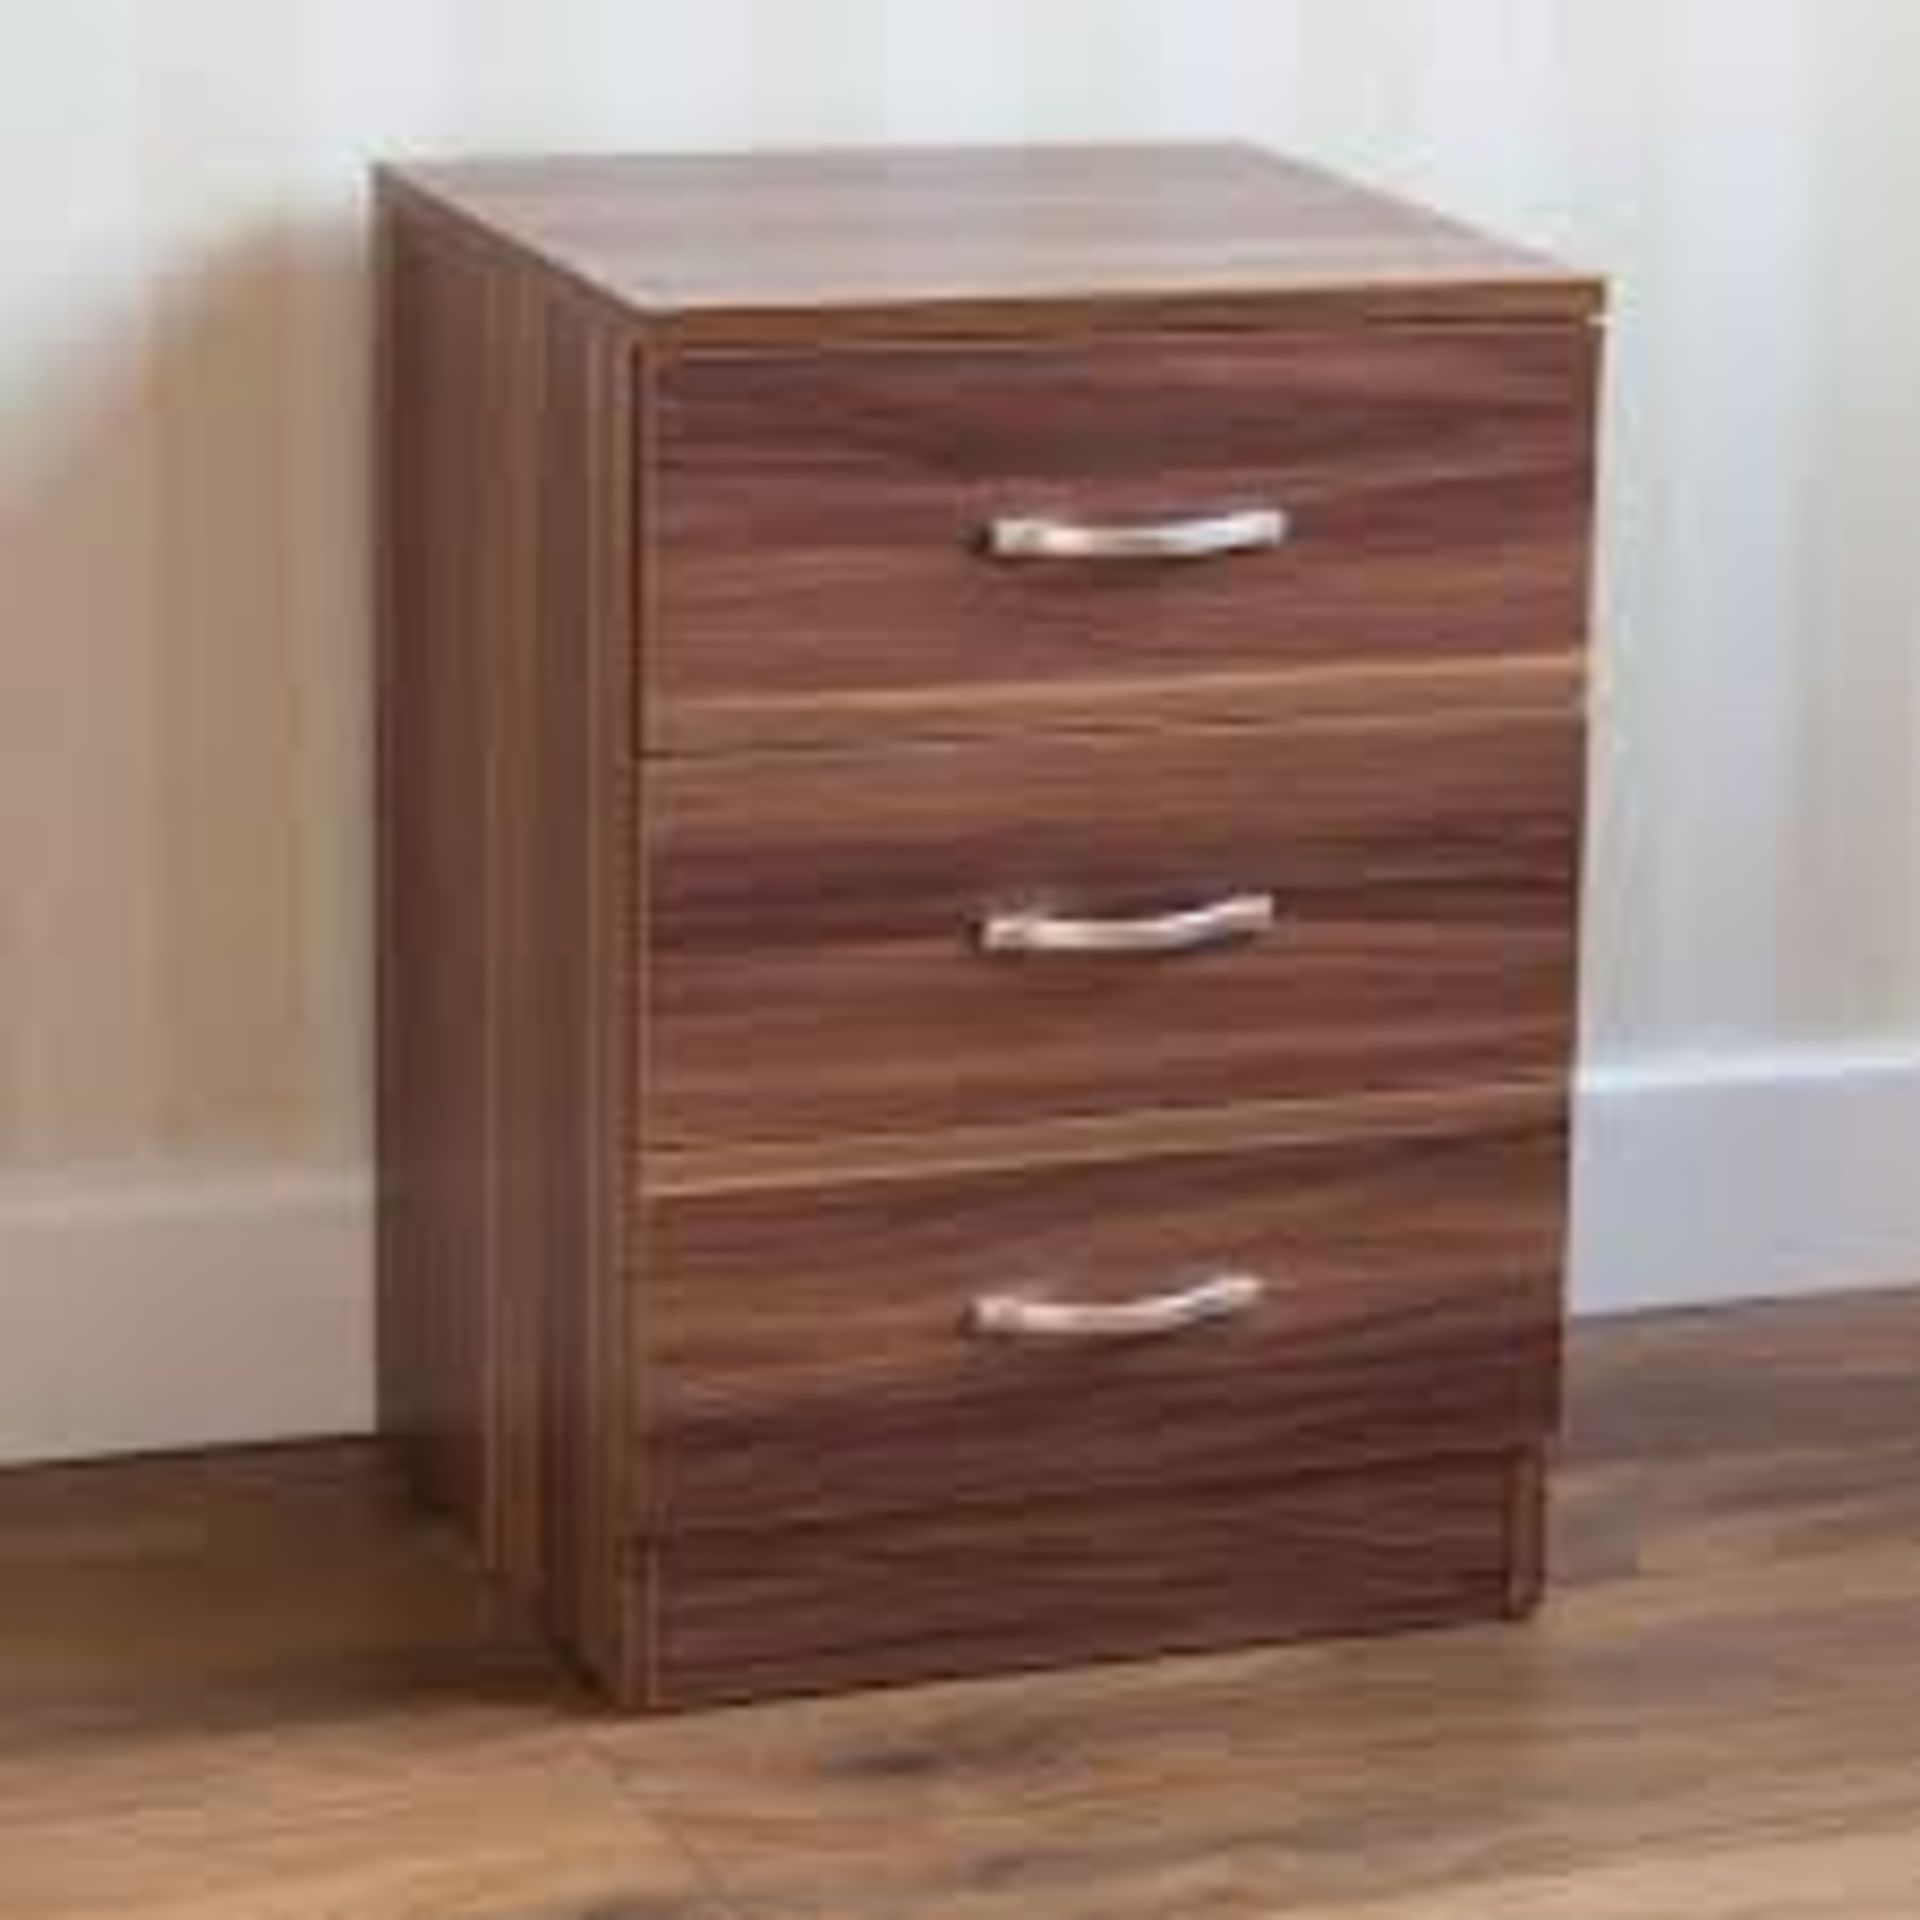 Boxed Walnut 3 Draw Chest of Drawers RRP £75 (14101) (Public Viewing and Appraisals Available)